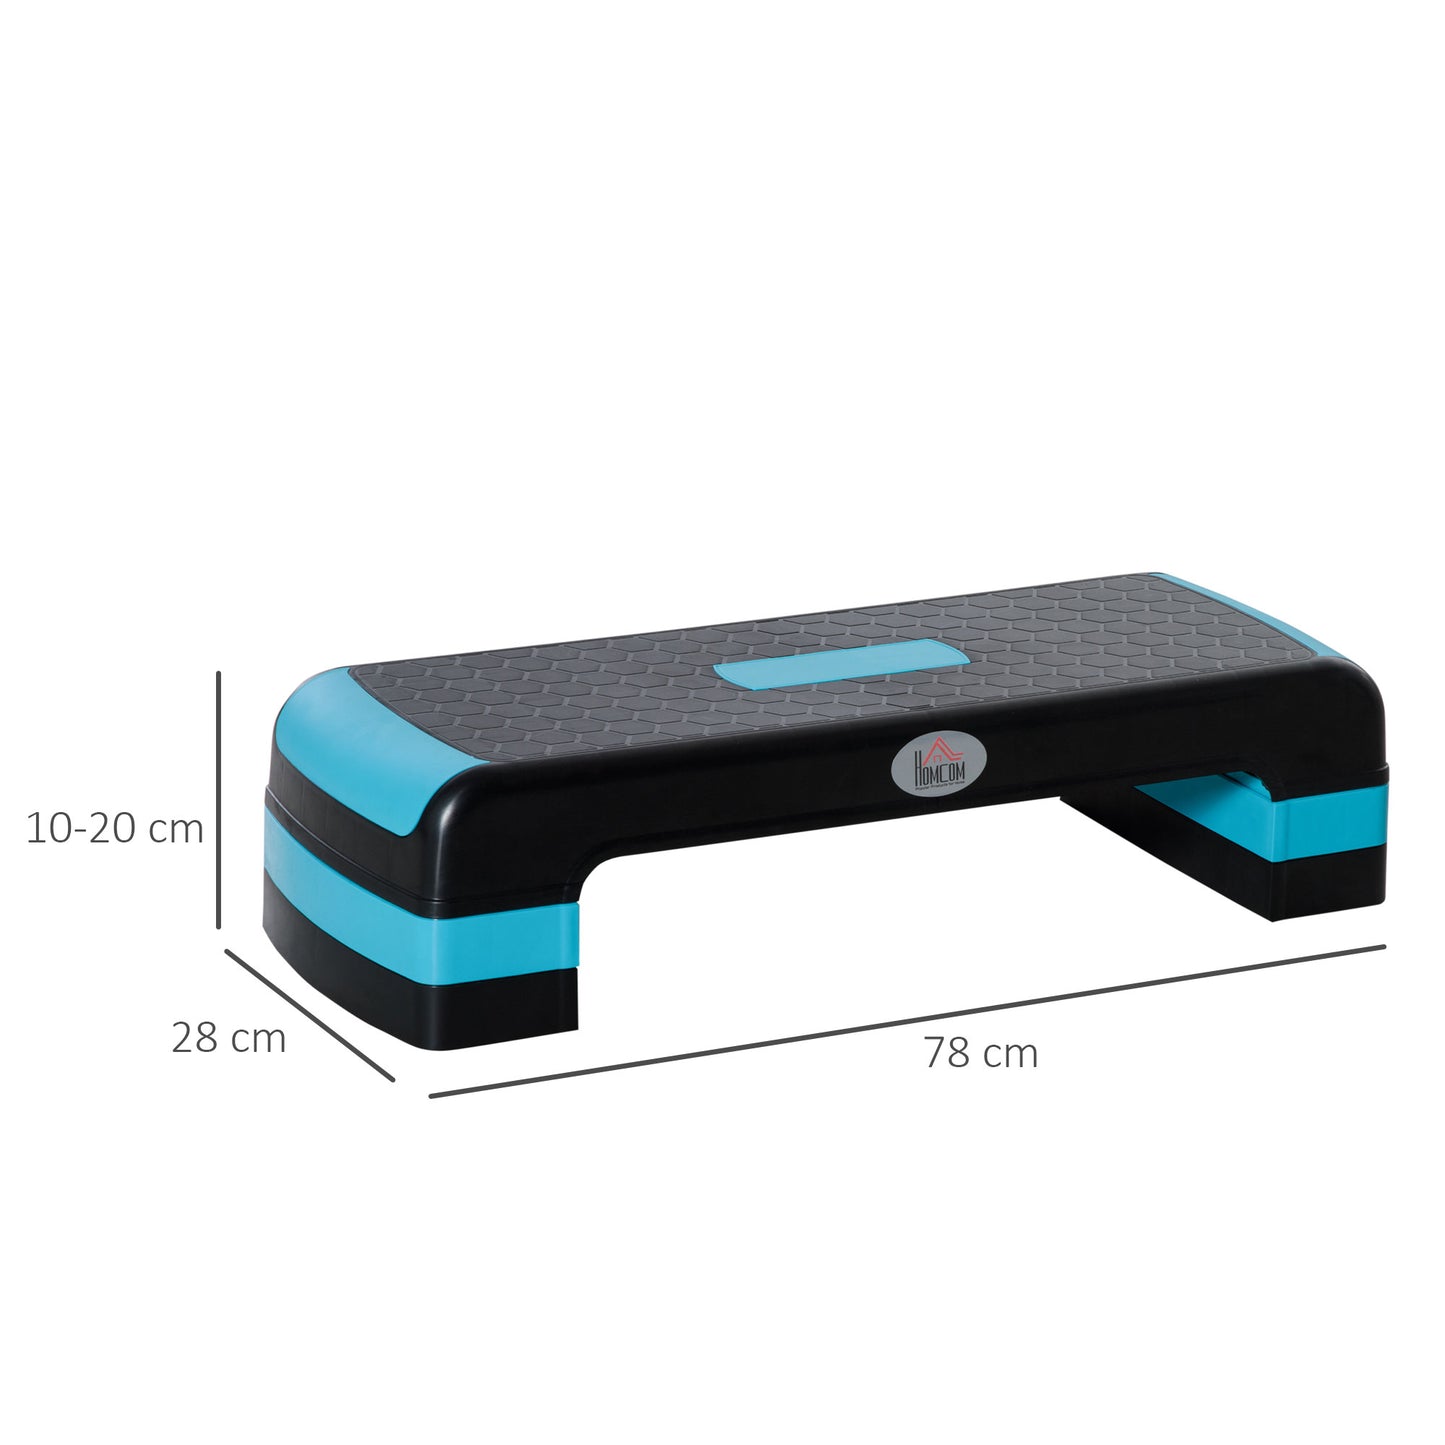 HOMCOM Aerobic Step, 10cm, 15cm & 20cm Height Adjustable Exercise Stepper, Nonslip Step Board Great for Home & Office